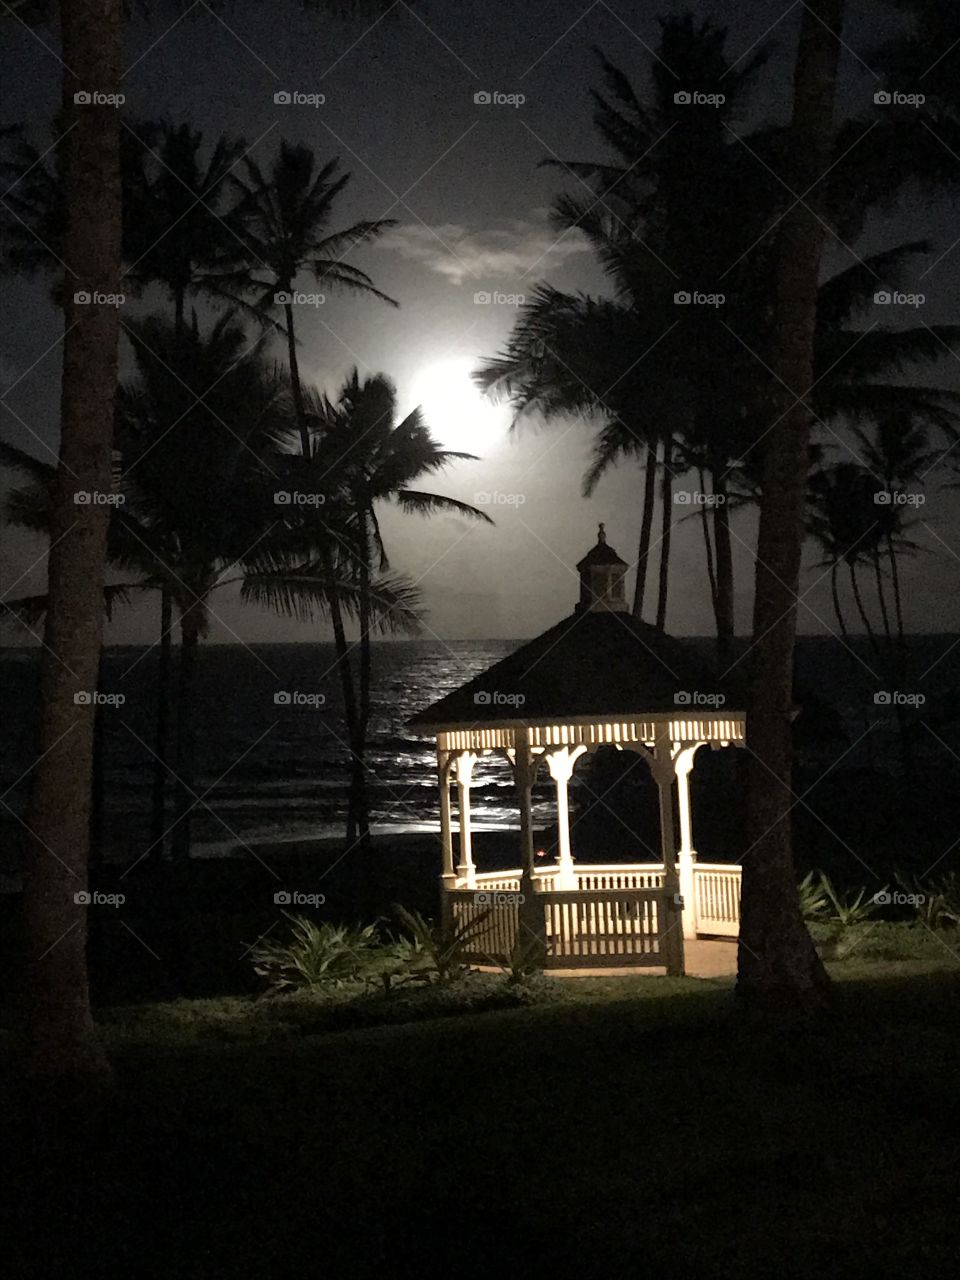 Last night in Kauai! This is one of the best pictures I’ve taken. Shows the moon, the ocean, and this well lit gazebo. It’s actually a color photo, just looks black and white.